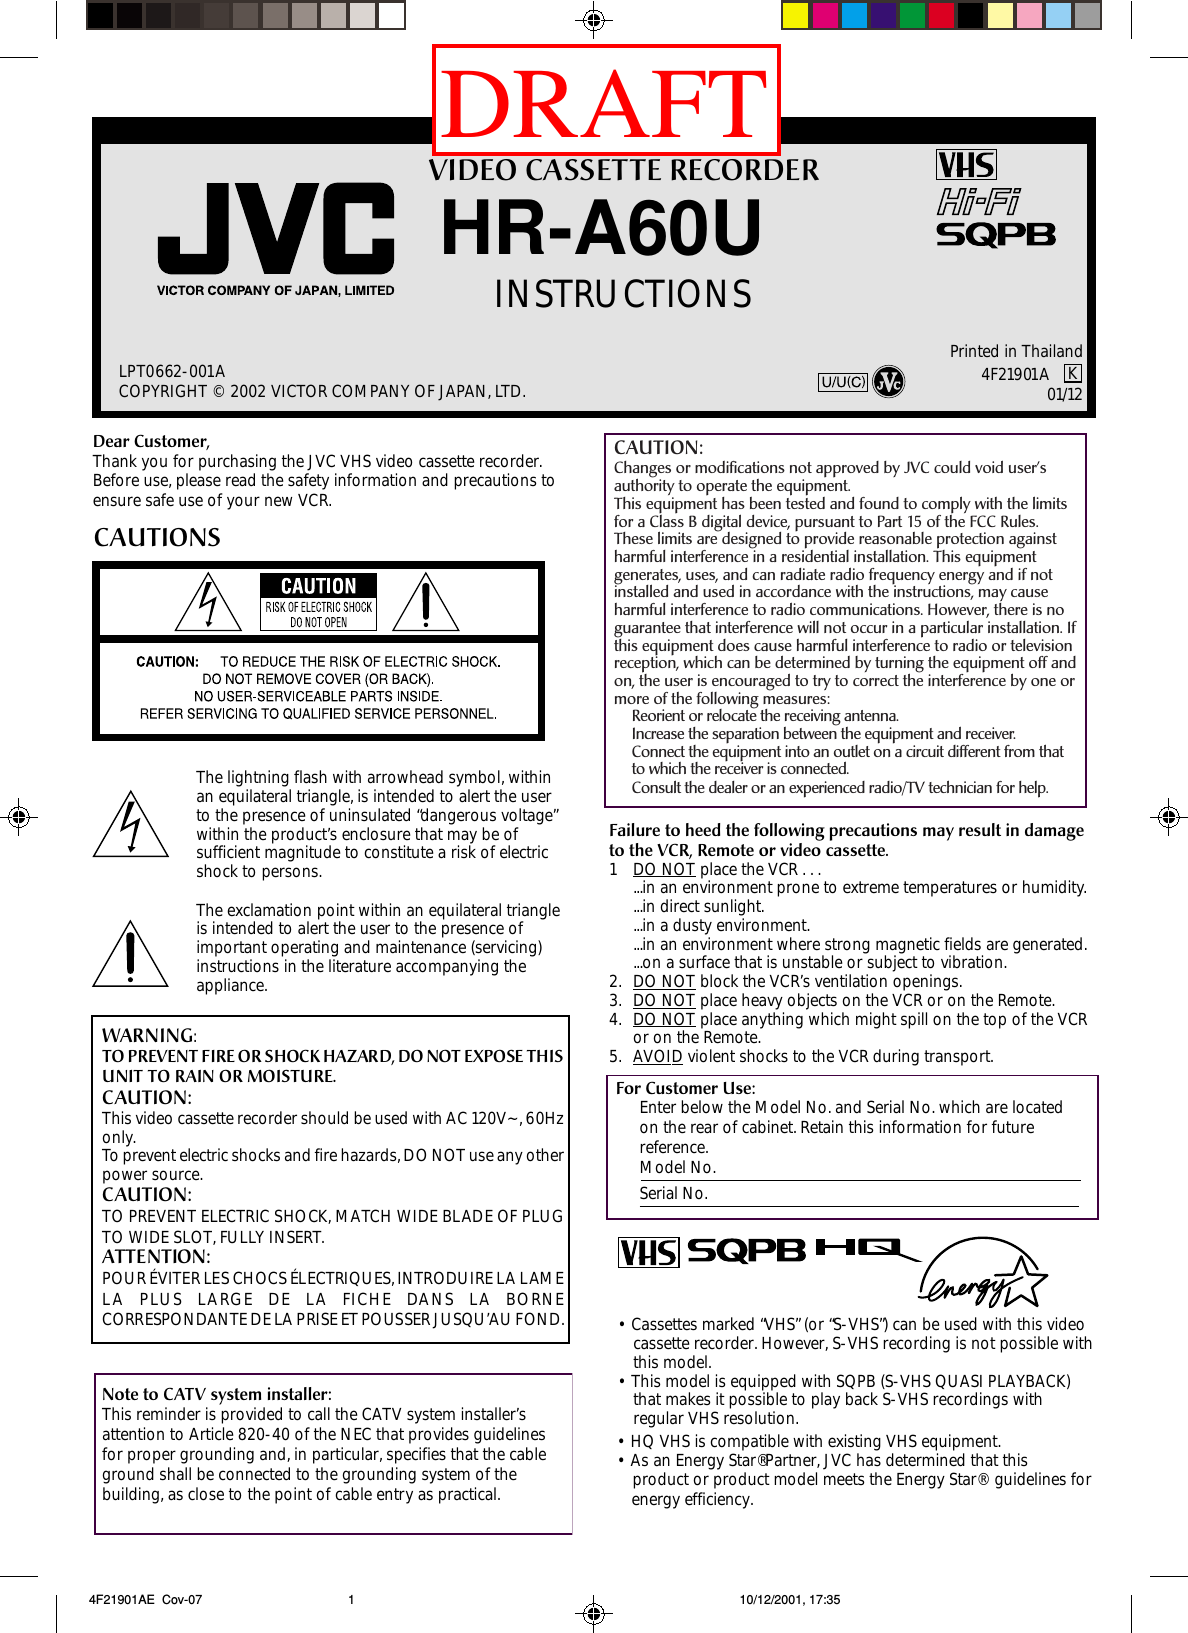 VIDEO CASSETTE RECORDERHR-A60UINSTRUCTIONSLPT0662-001ACOPYRIGHT © 2002 VICTOR COMPANY OF JAPAN, LTD.Printed in ThailandDear Customer,Thank you for purchasing the JVC VHS video cassette recorder.Before use, please read the safety information and precautions toensure safe use of your new VCR.CAUTIONSWARNING:TO PREVENT FIRE OR SHOCK HAZARD, DO NOT EXPOSE THISUNIT TO RAIN OR MOISTURE.CAUTION:This video cassette recorder should be used with AC 120V~, 60Hzonly.To prevent electric shocks and fire hazards, DO NOT use any otherpower source.CAUTION:TO PREVENT ELECTRIC SHOCK, MATCH WIDE BLADE OF PLUGTO WIDE SLOT, FULLY INSERT.ATTENTION:POUR ÉVITER LES CHOCS ÉLECTRIQUES, INTRODUIRE LA LAMELA PLUS LARGE DE LA FICHE DANS LA BORNECORRESPONDANTE DE LA PRISE ET POUSSER JUSQU’AU FOND.Note to CATV system installer:This reminder is provided to call the CATV system installer’sattention to Article 820-40 of the NEC that provides guidelinesfor proper grounding and, in particular, specifies that the cableground shall be connected to the grounding system of thebuilding, as close to the point of cable entry as practical.Failure to heed the following precautions may result in damageto the VCR, Remote or video cassette.1DO NOT place the VCR . . ....in an environment prone to extreme temperatures or humidity....in direct sunlight....in a dusty environment....in an environment where strong magnetic fields are generated....on a surface that is unstable or subject to vibration.2. DO NOT block the VCR’s ventilation openings.3. DO NOT place heavy objects on the VCR or on the Remote.4. DO NOT place anything which might spill on the top of the VCRor on the Remote.5. AVOID violent shocks to the VCR during transport.For Customer Use:Enter below the Model No. and Serial No. which are locatedon the rear of cabinet. Retain this information for futurereference.Model No.Serial No.The lightning flash with arrowhead symbol, withinan equilateral triangle, is intended to alert the userto the presence of uninsulated “dangerous voltage”within the product’s enclosure that may be ofsufficient magnitude to constitute a risk of electricshock to persons.The exclamation point within an equilateral triangleis intended to alert the user to the presence ofimportant operating and maintenance (servicing)instructions in the literature accompanying theappliance.4F21901A K01/12 4F21901AE  Cov-07 10/12/2001, 17:351•  Cassettes marked “VHS” (or “S-VHS”) can be used with this videocassette recorder. However, S-VHS recording is not possible withthis model.•  This model is equipped with SQPB (S-VHS QUASI PLAYBACK)that makes it possible to play back S-VHS recordings withregular VHS resolution.•  HQ VHS is compatible with existing VHS equipment.•  As an Energy Star® Partner, JVC has determined that thisproduct or product model meets the Energy Star®   guidelines forenergy efficiency.CAUTION:Changes or modifications not approved by JVC could void user’sauthority to operate the equipment.This equipment has been tested and found to comply with the limitsfor a Class B digital device, pursuant to Part 15 of the FCC Rules.These limits are designed to provide reasonable protection againstharmful interference in a residential installation. This equipmentgenerates, uses, and can radiate radio frequency energy and if notinstalled and used in accordance with the instructions, may causeharmful interference to radio communications. However, there is noguarantee that interference will not occur in a particular installation. Ifthis equipment does cause harmful interference to radio or televisionreception, which can be determined by turning the equipment off andon, the user is encouraged to try to correct the interference by one ormore of the following measures:Reorient or relocate the receiving antenna.Increase the separation between the equipment and receiver.Connect the equipment into an outlet on a circuit different from thatto which the receiver is connected.Consult the dealer or an experienced radio/TV technician for help.DRAFT